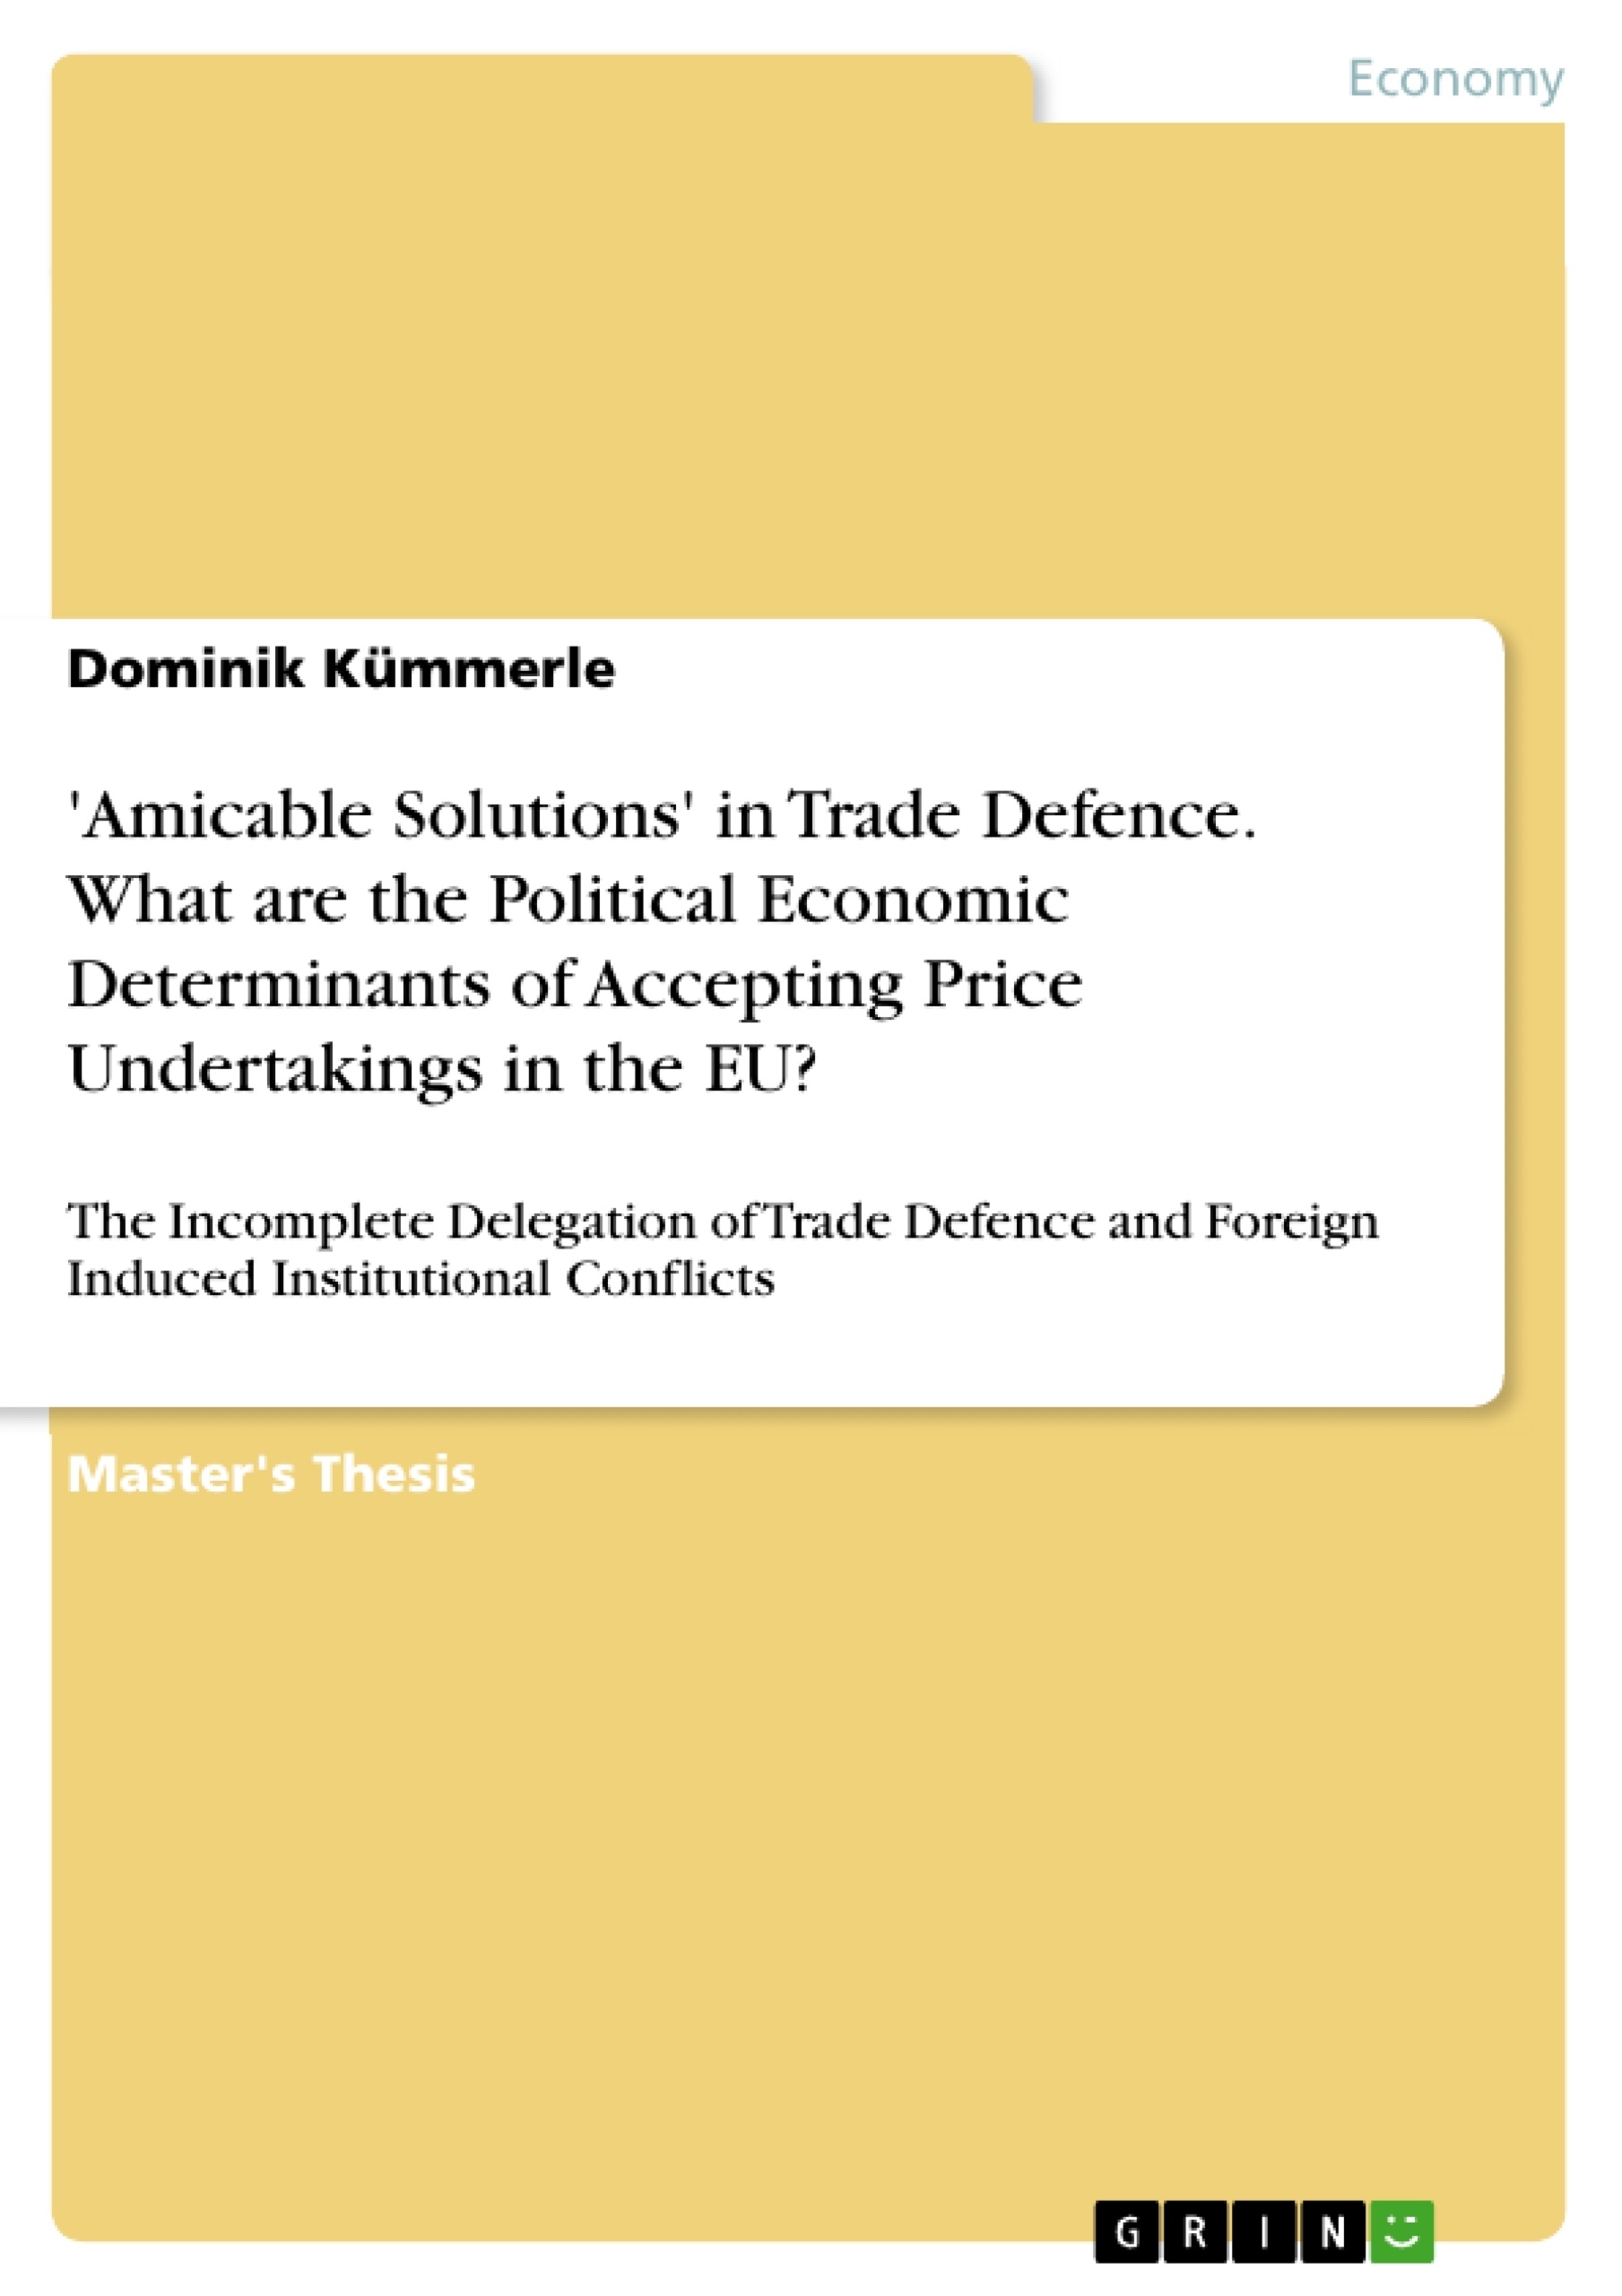 Titre: 'Amicable Solutions' in Trade Defence. What are the Political Economic Determinants of Accepting Price Undertakings in the EU?